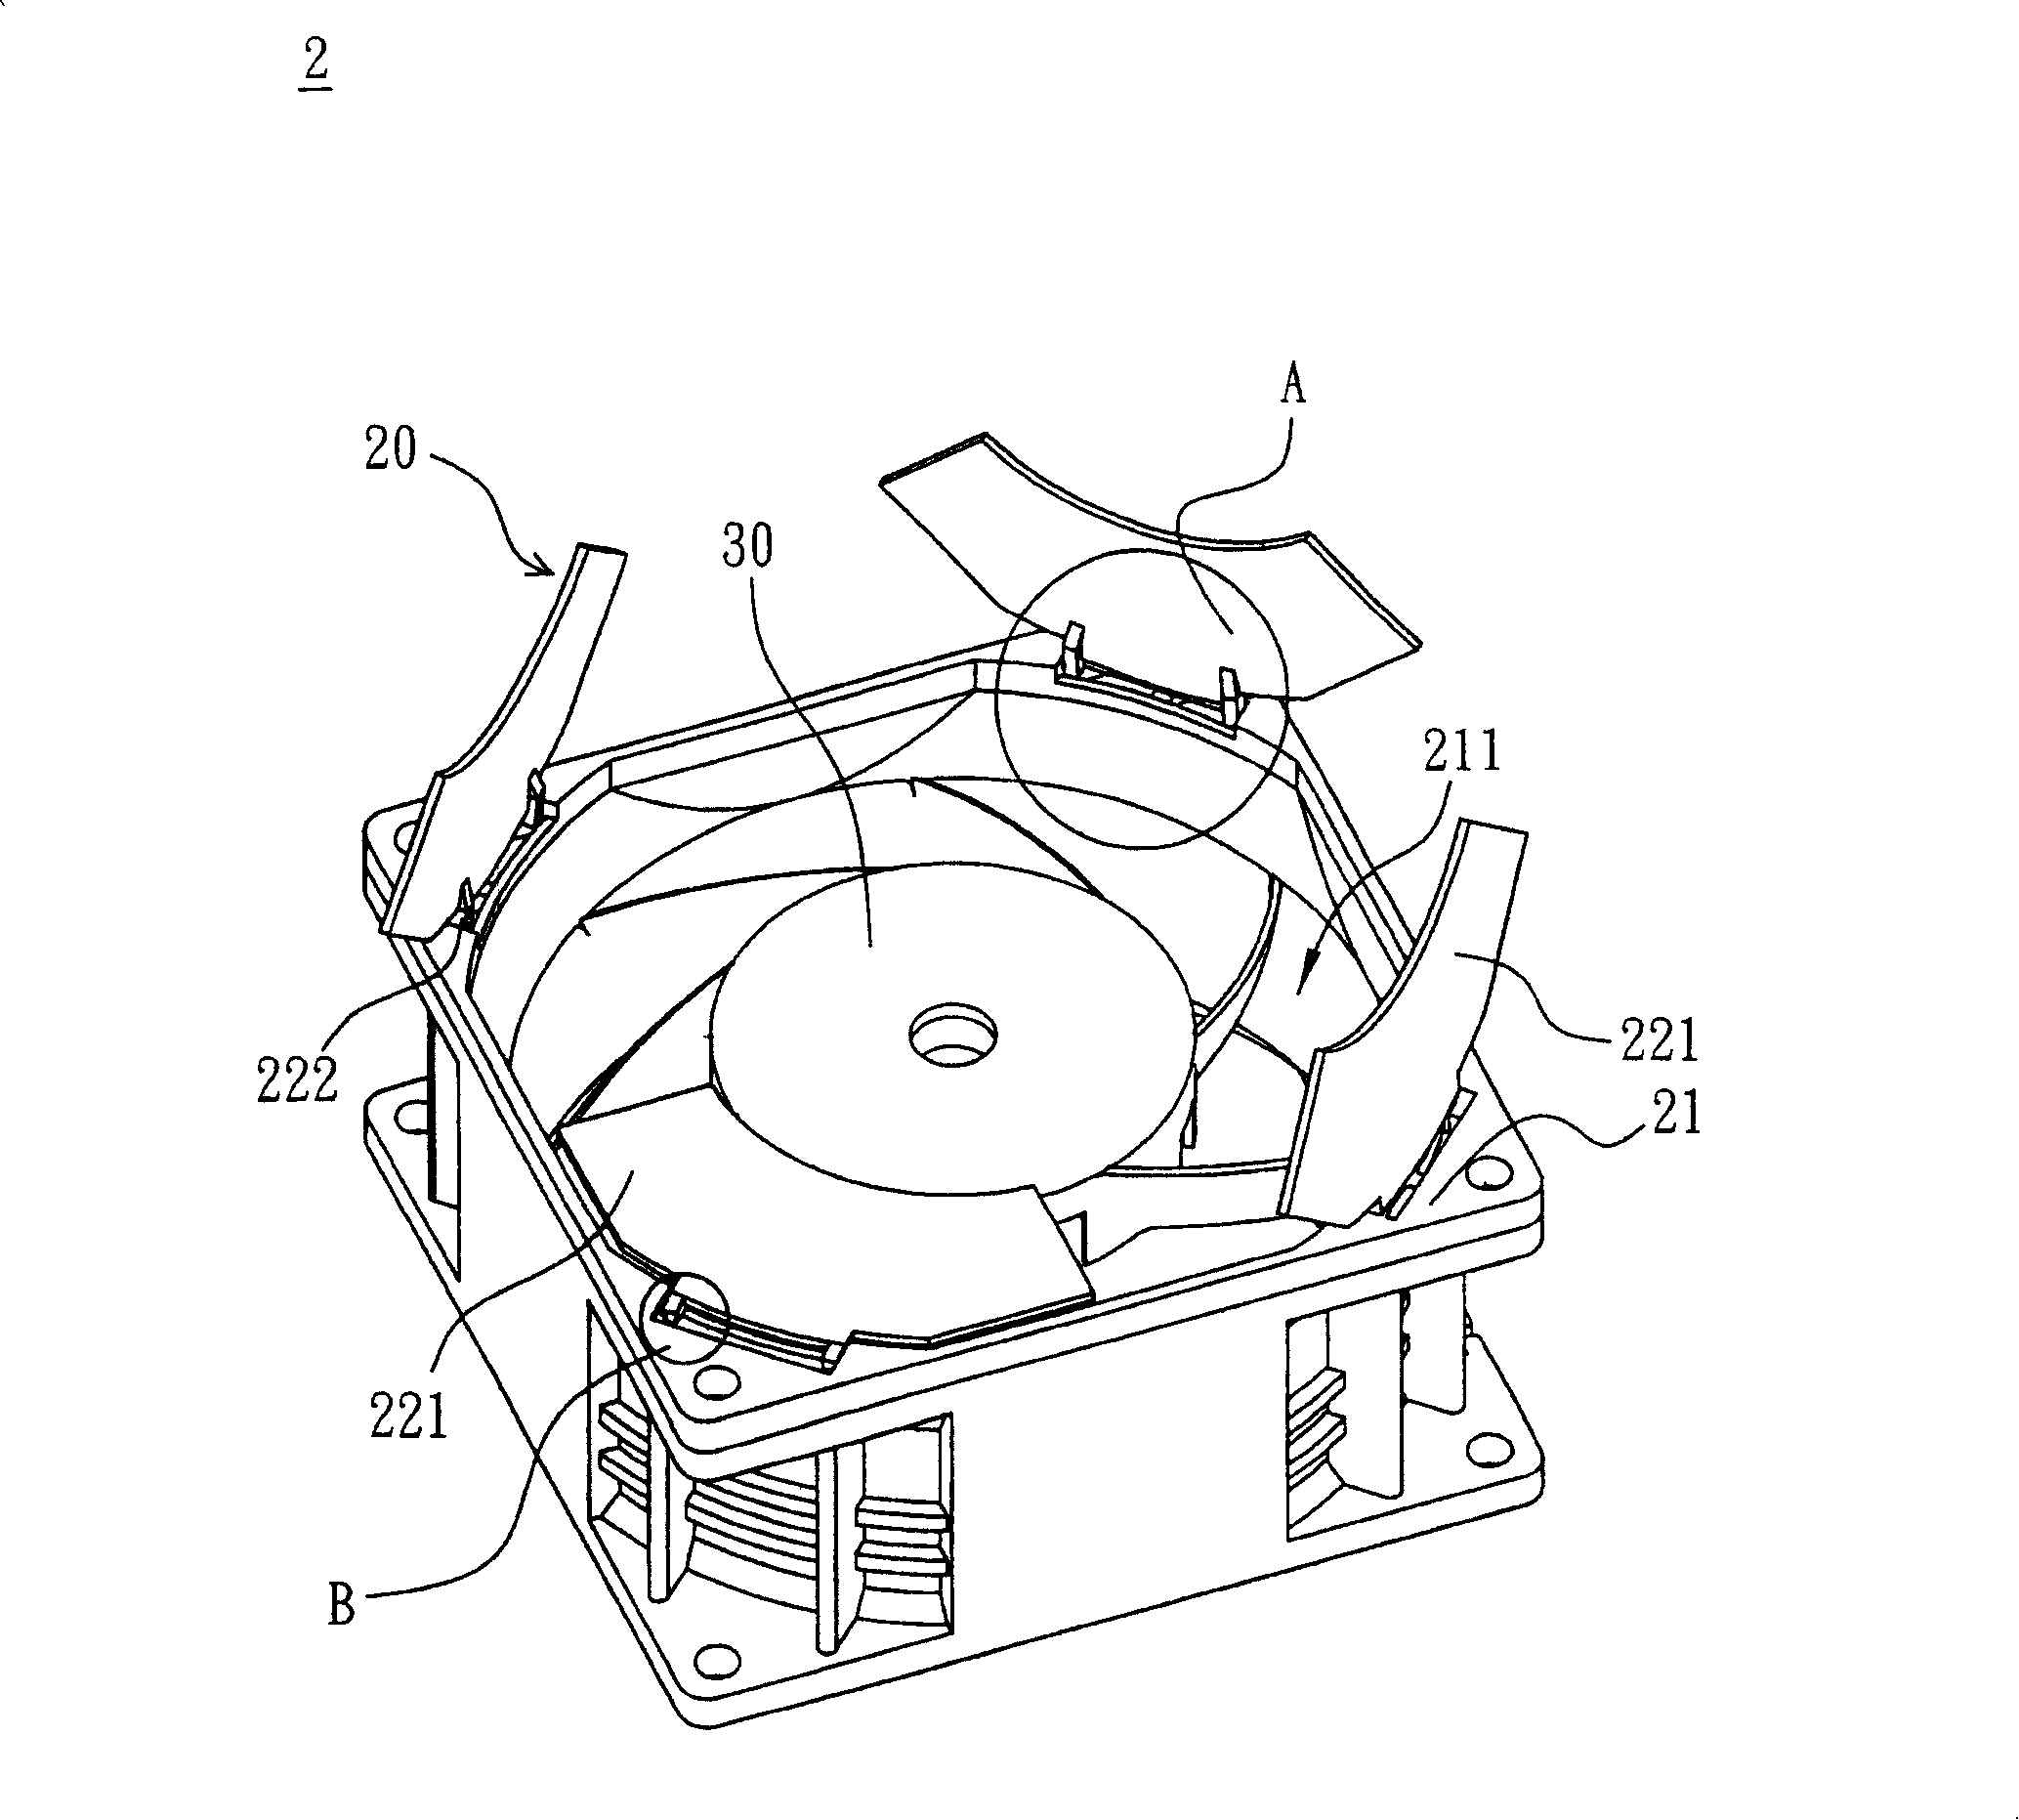 Fan with fan window structure and fan frame thereof